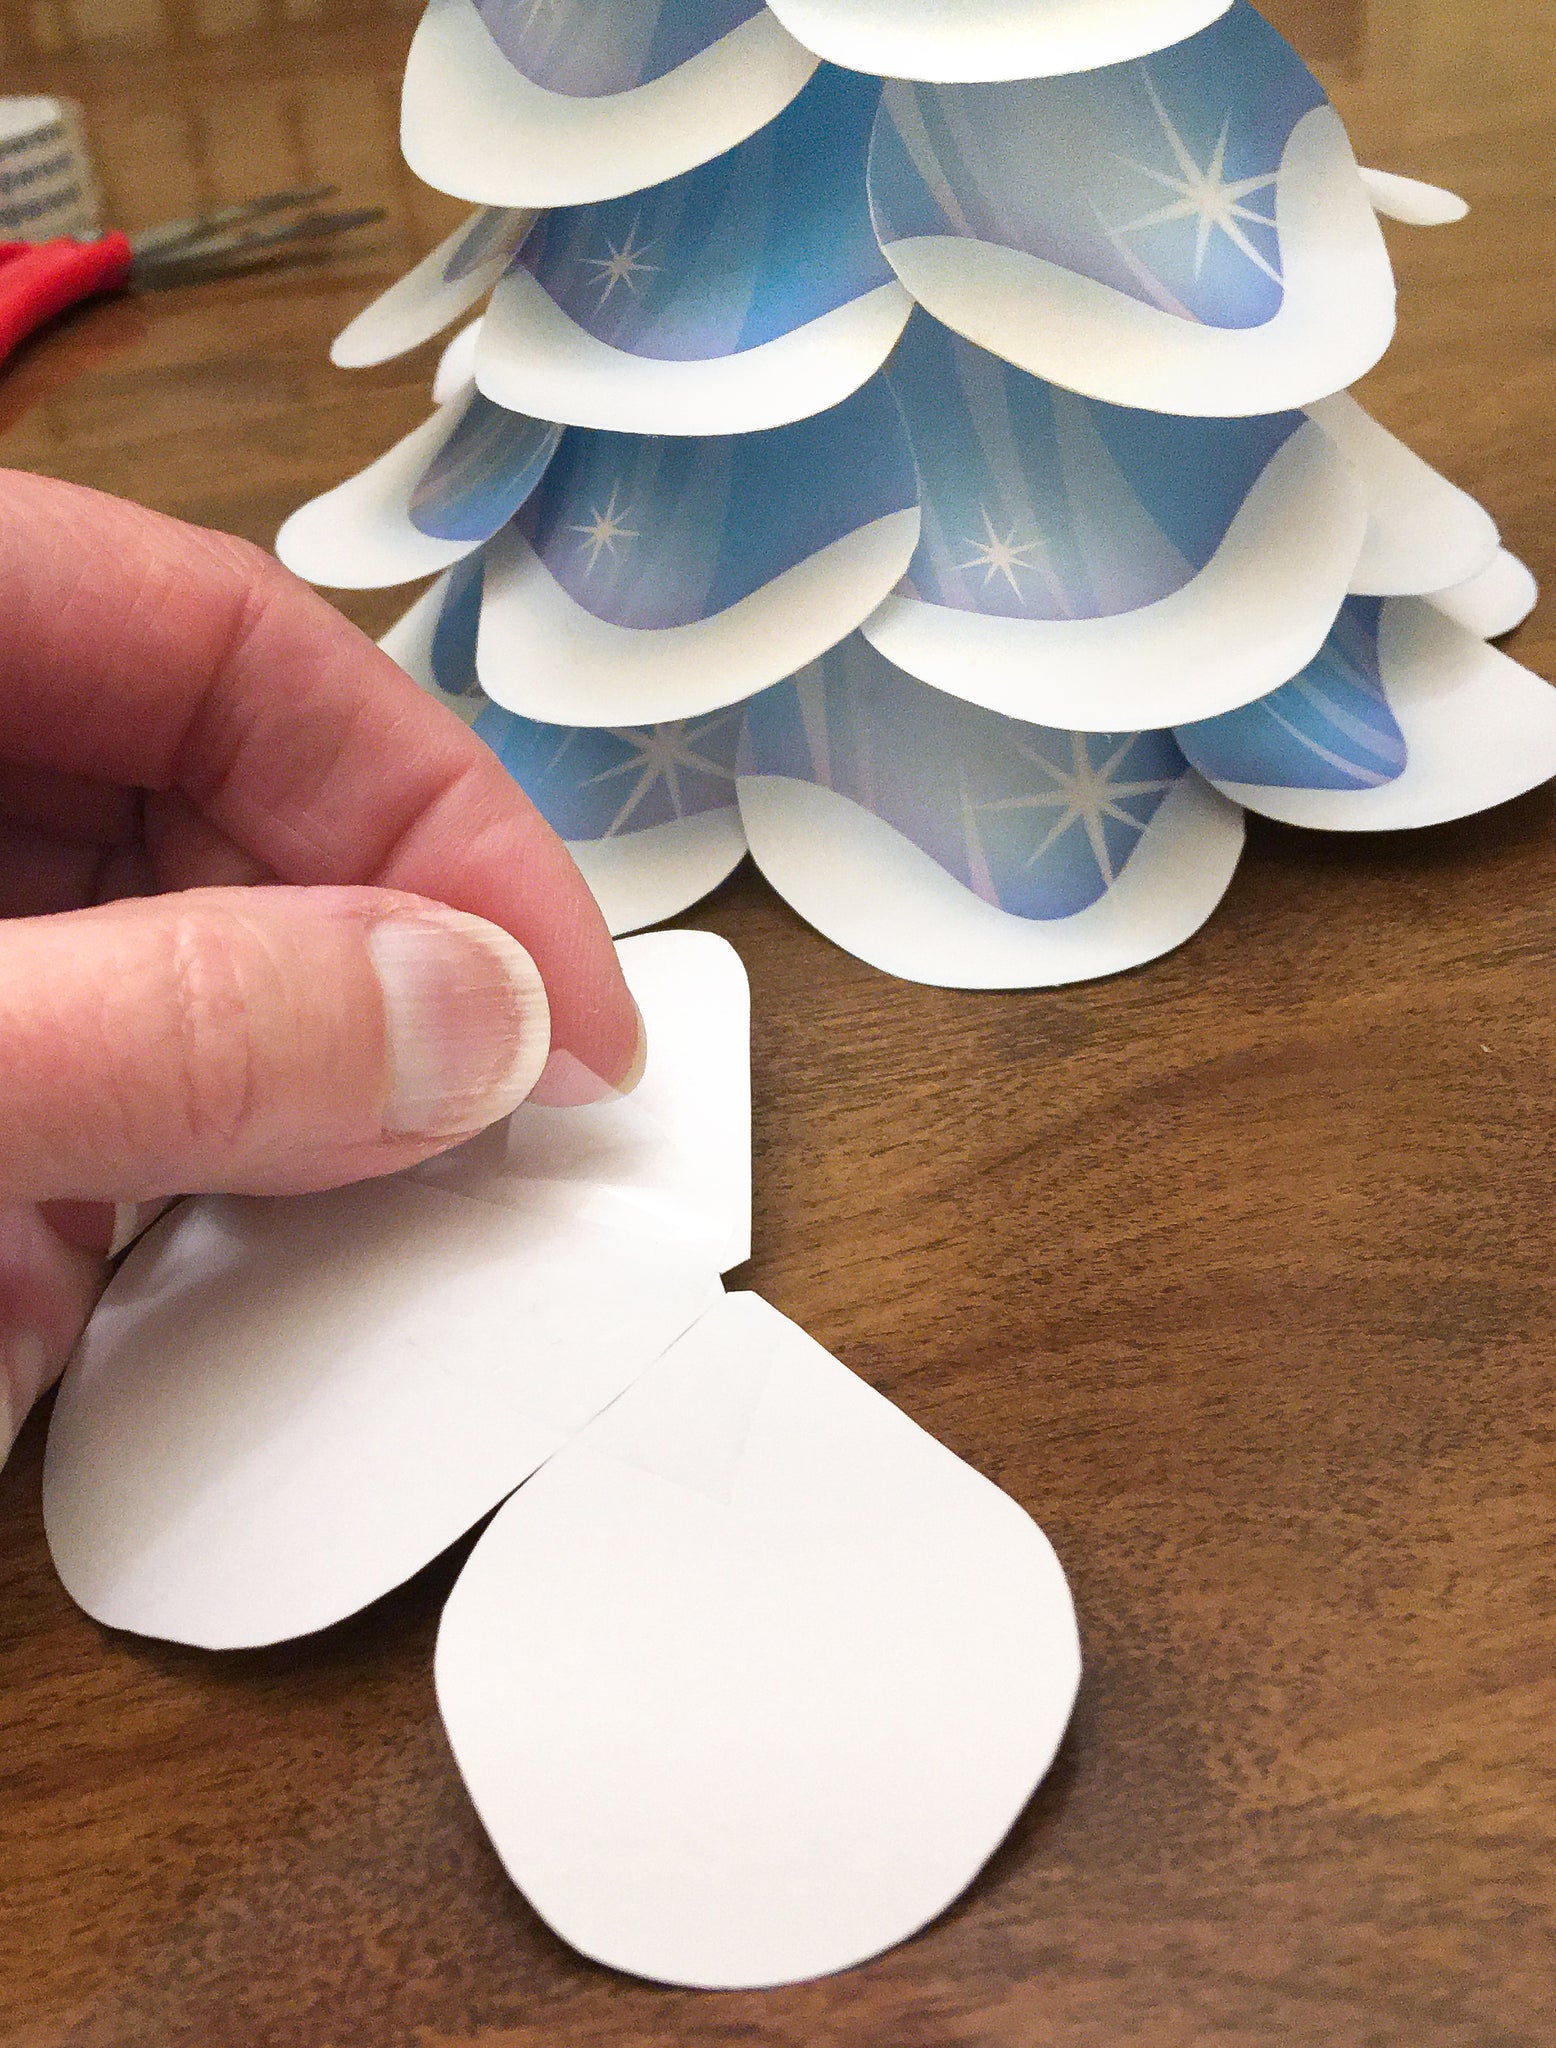 Tabletop paper Christmas trees decoration DIY project